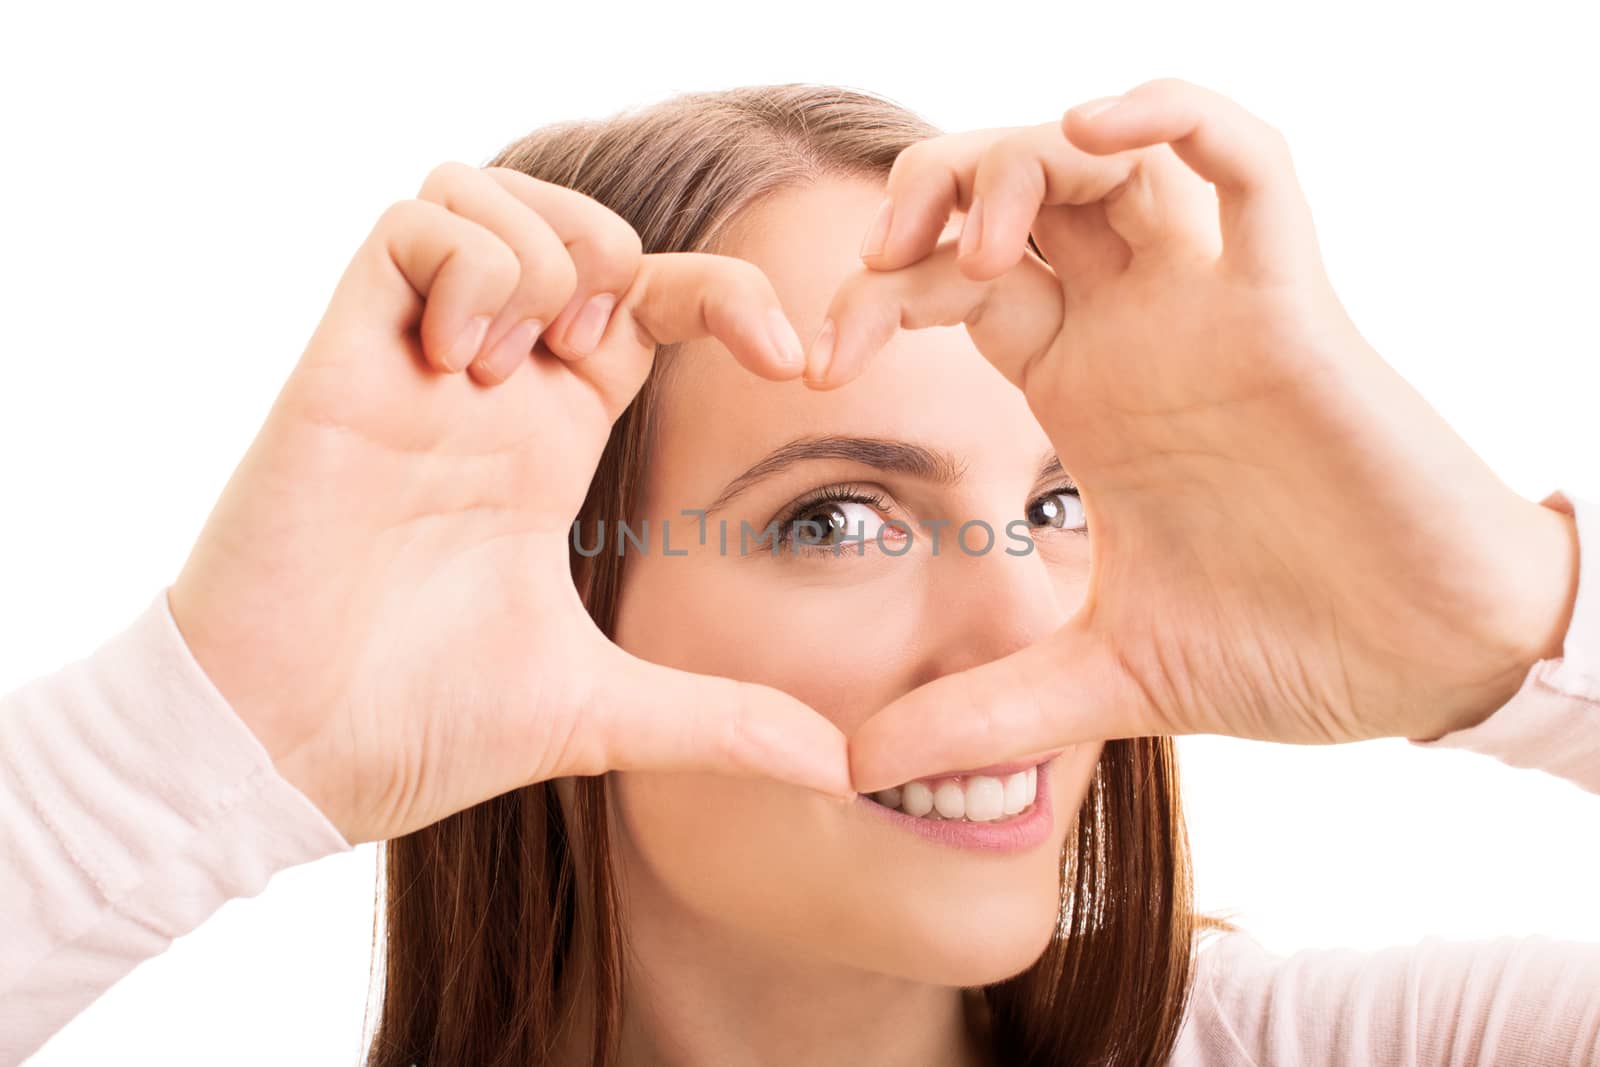 Close up beauty portrait of a smiling young girl looking through a heart shaped hands, isolated on white background.